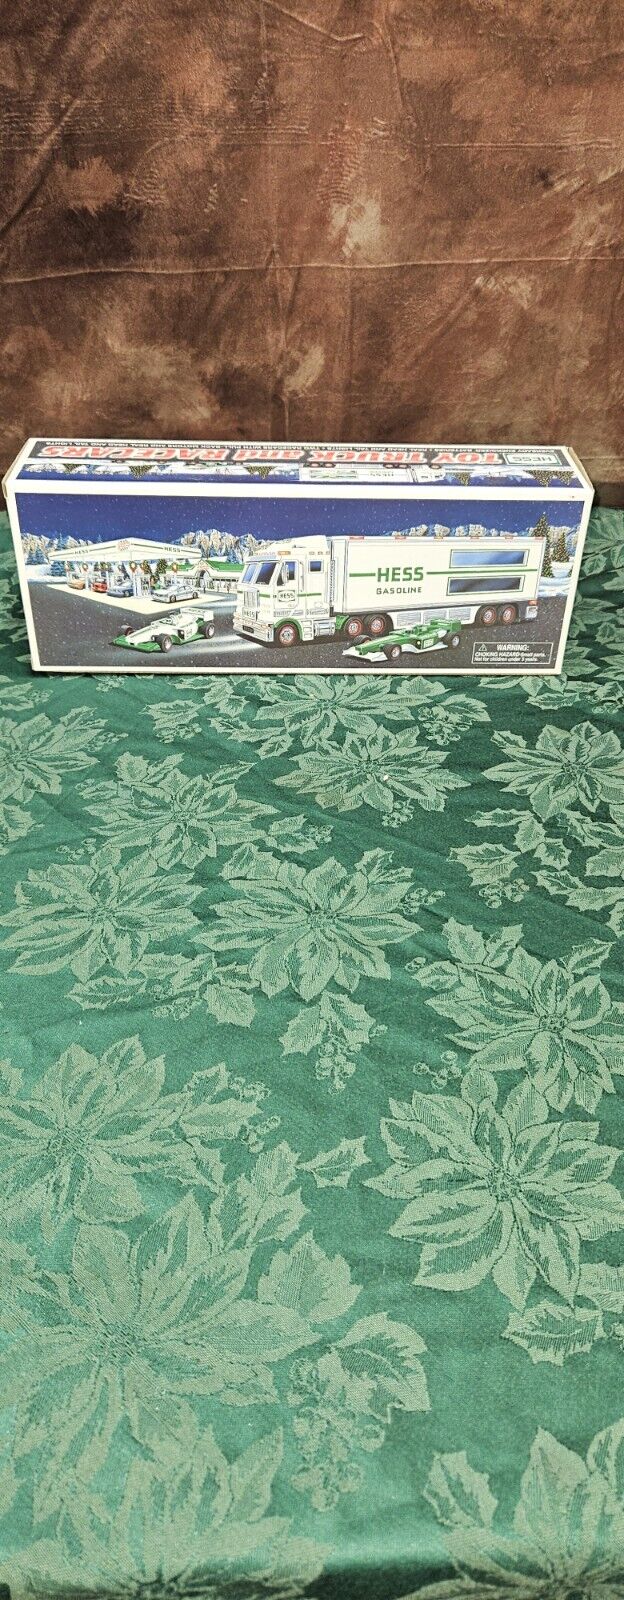 Hess Toy Truck With Racecars In Box